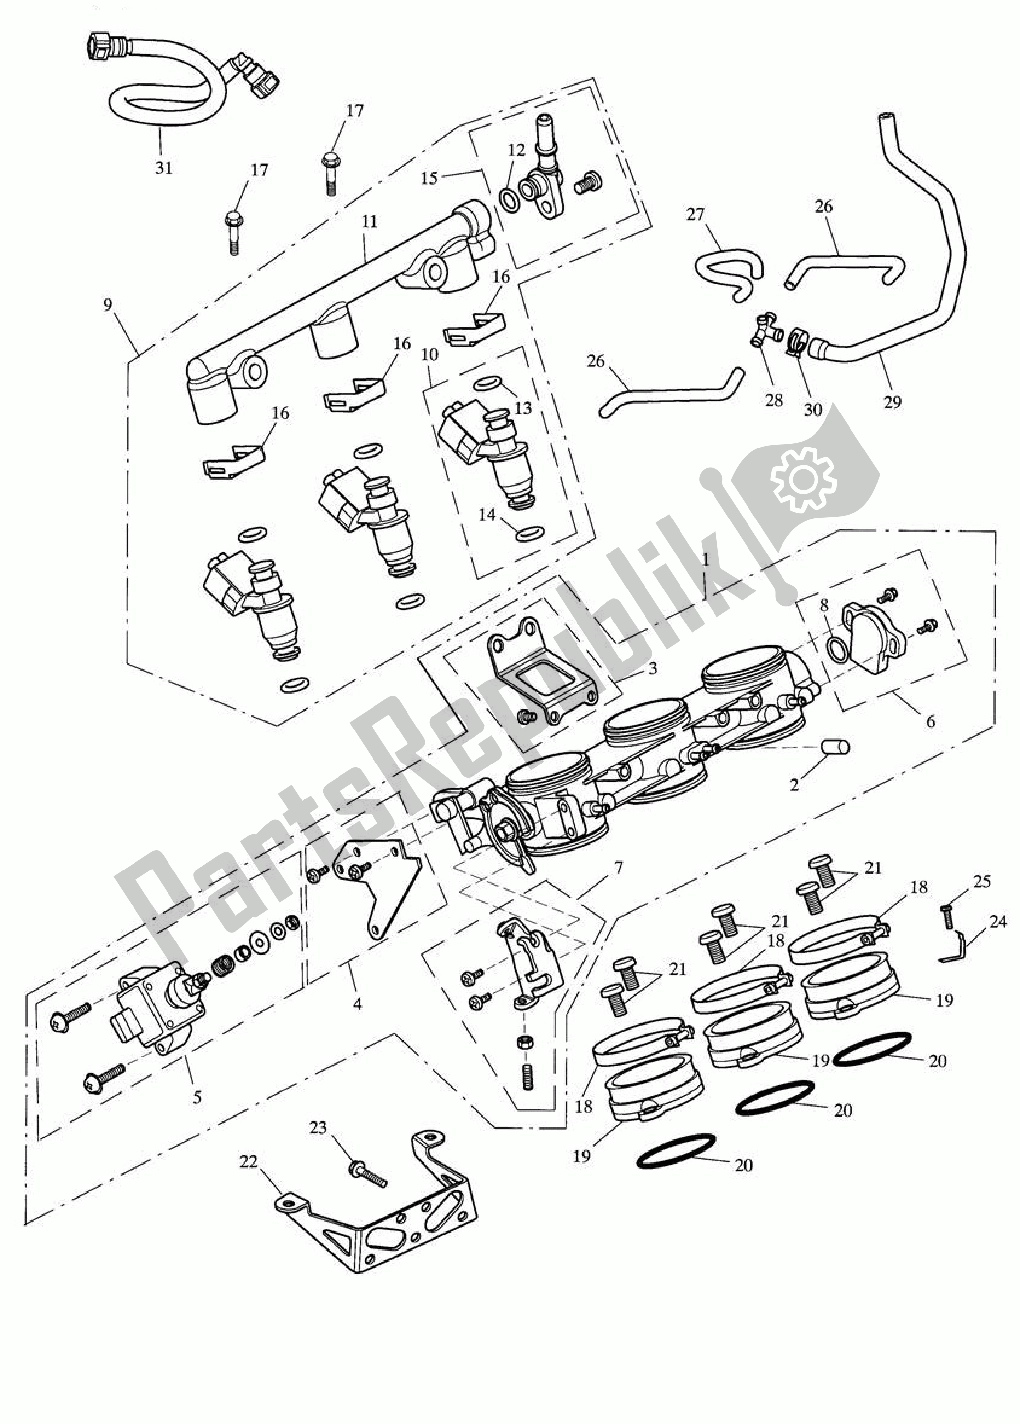 All parts for the Throttles, Injectors And Fuel Rail of the Triumph Speed Triple 1050 2008 - 2012